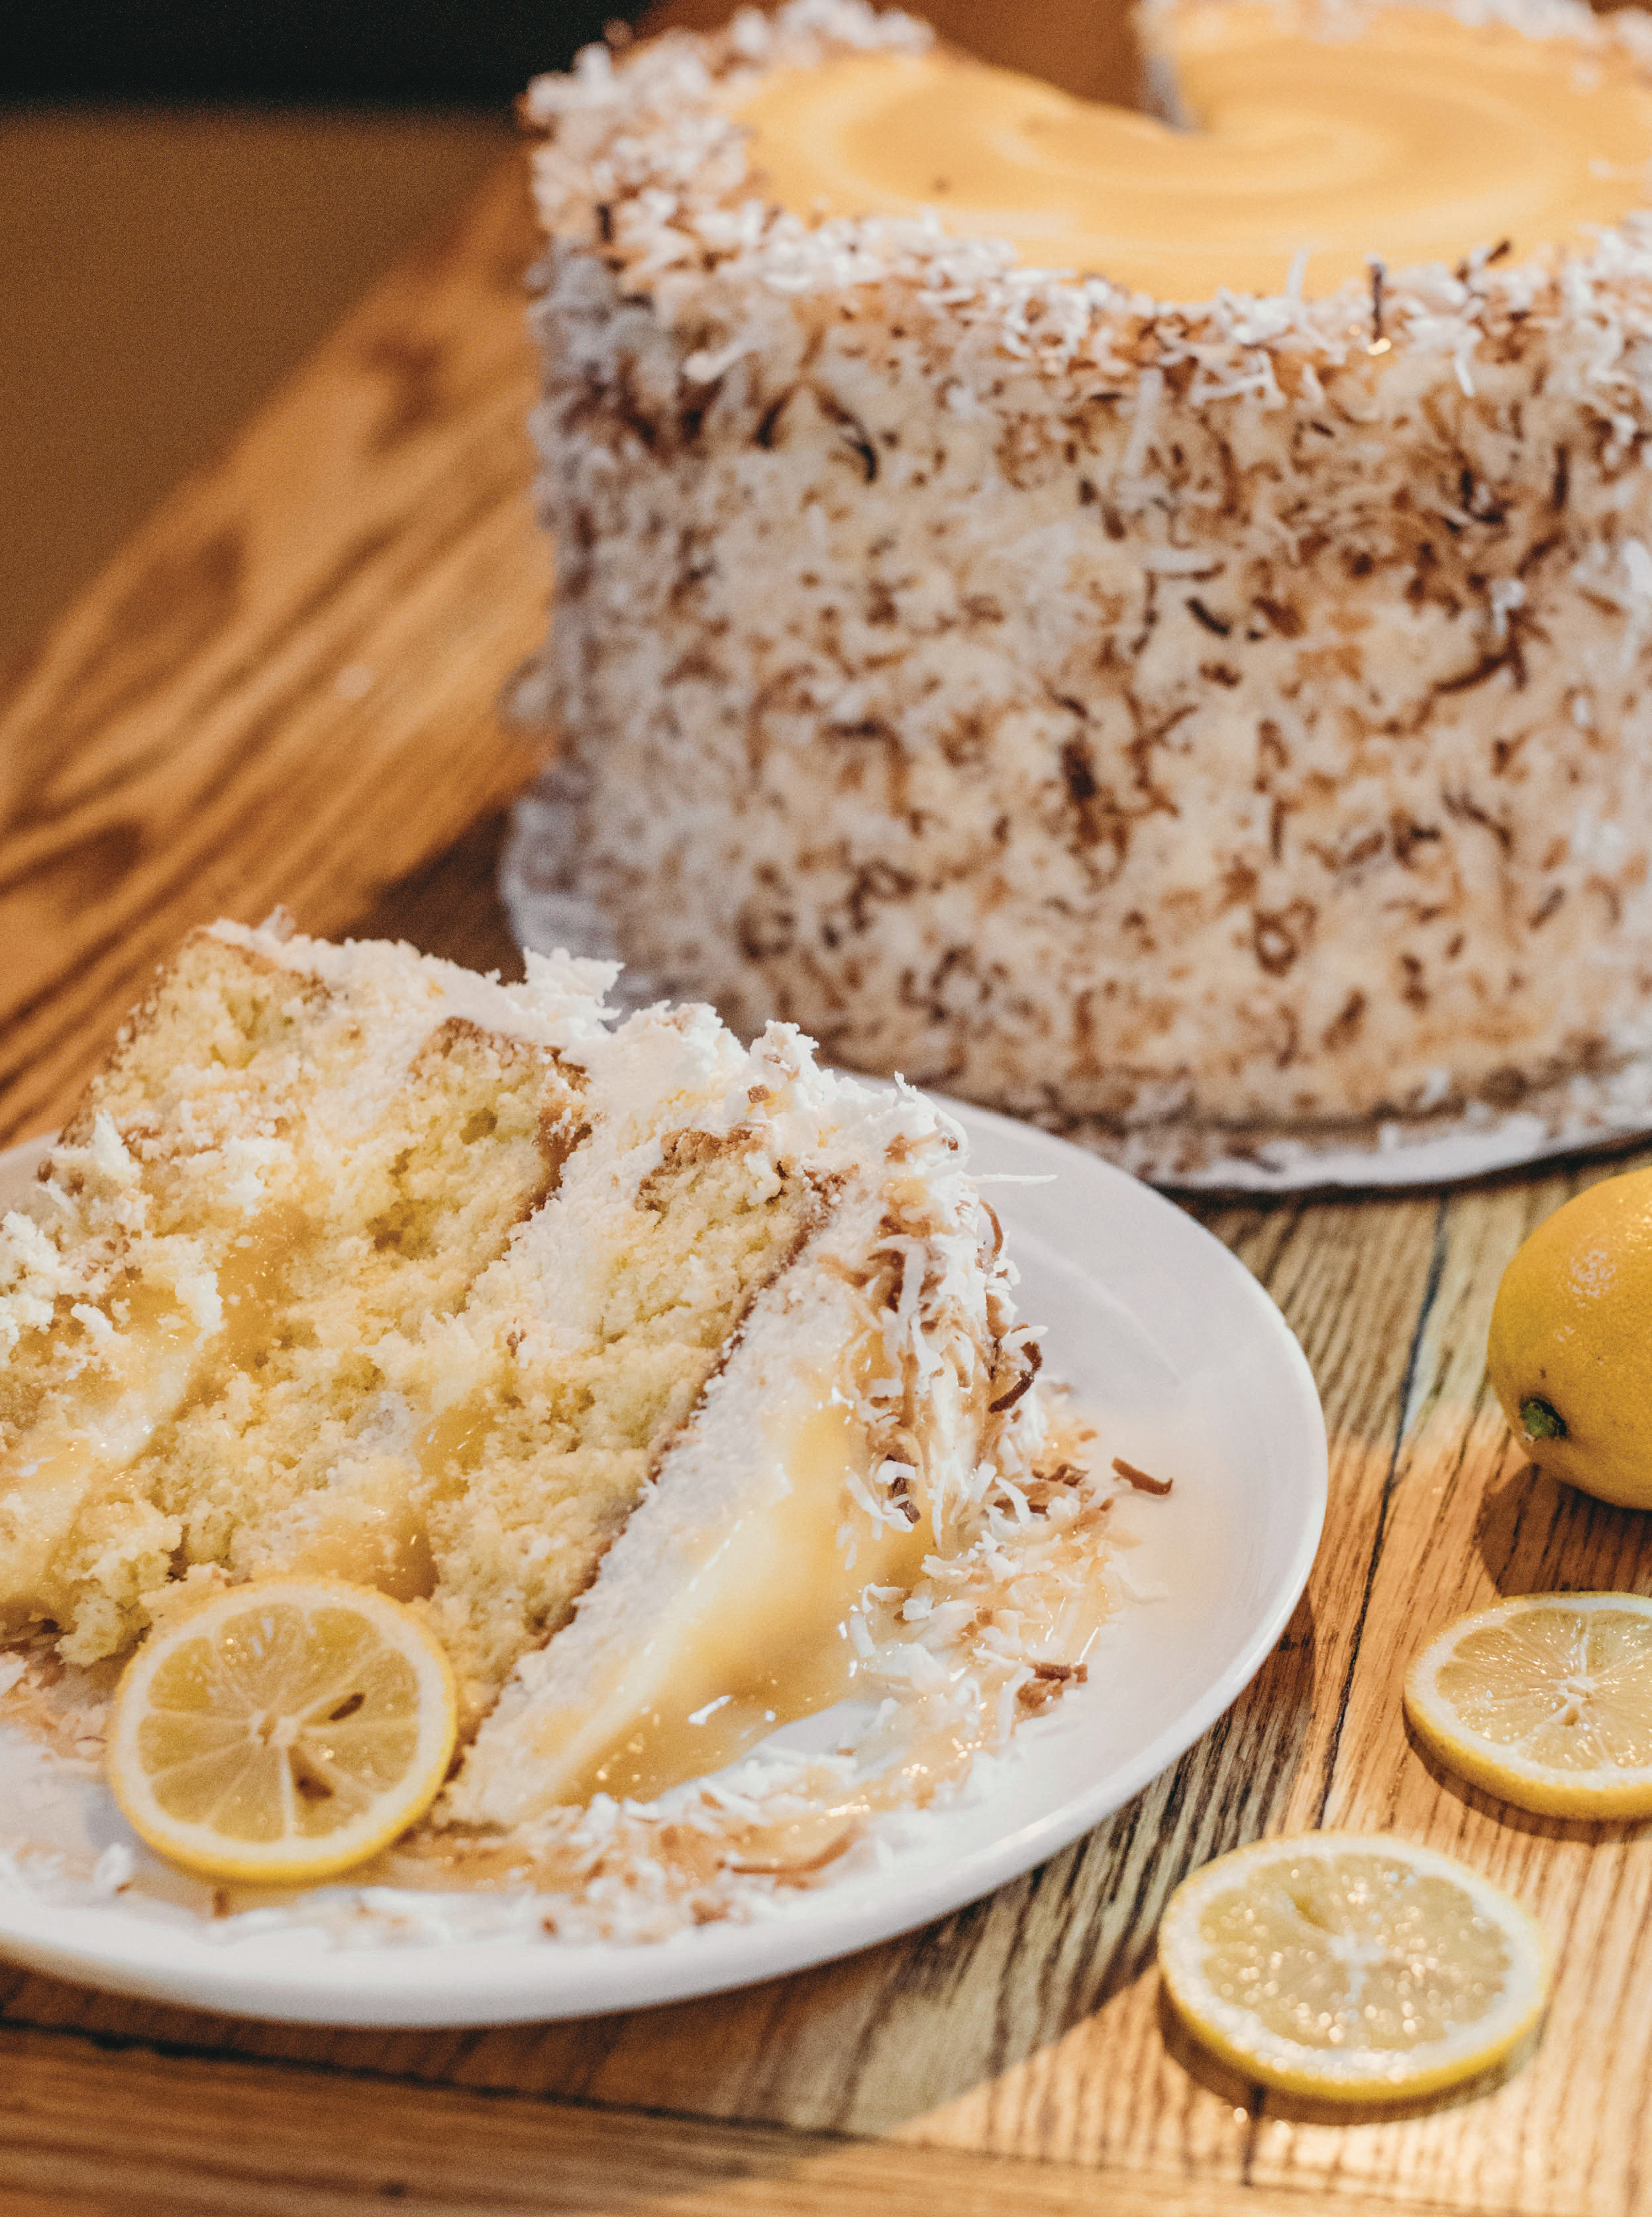 This decadent lemon-coconut cake served at Bethany Blues is the perfect citrusy treat for the season.